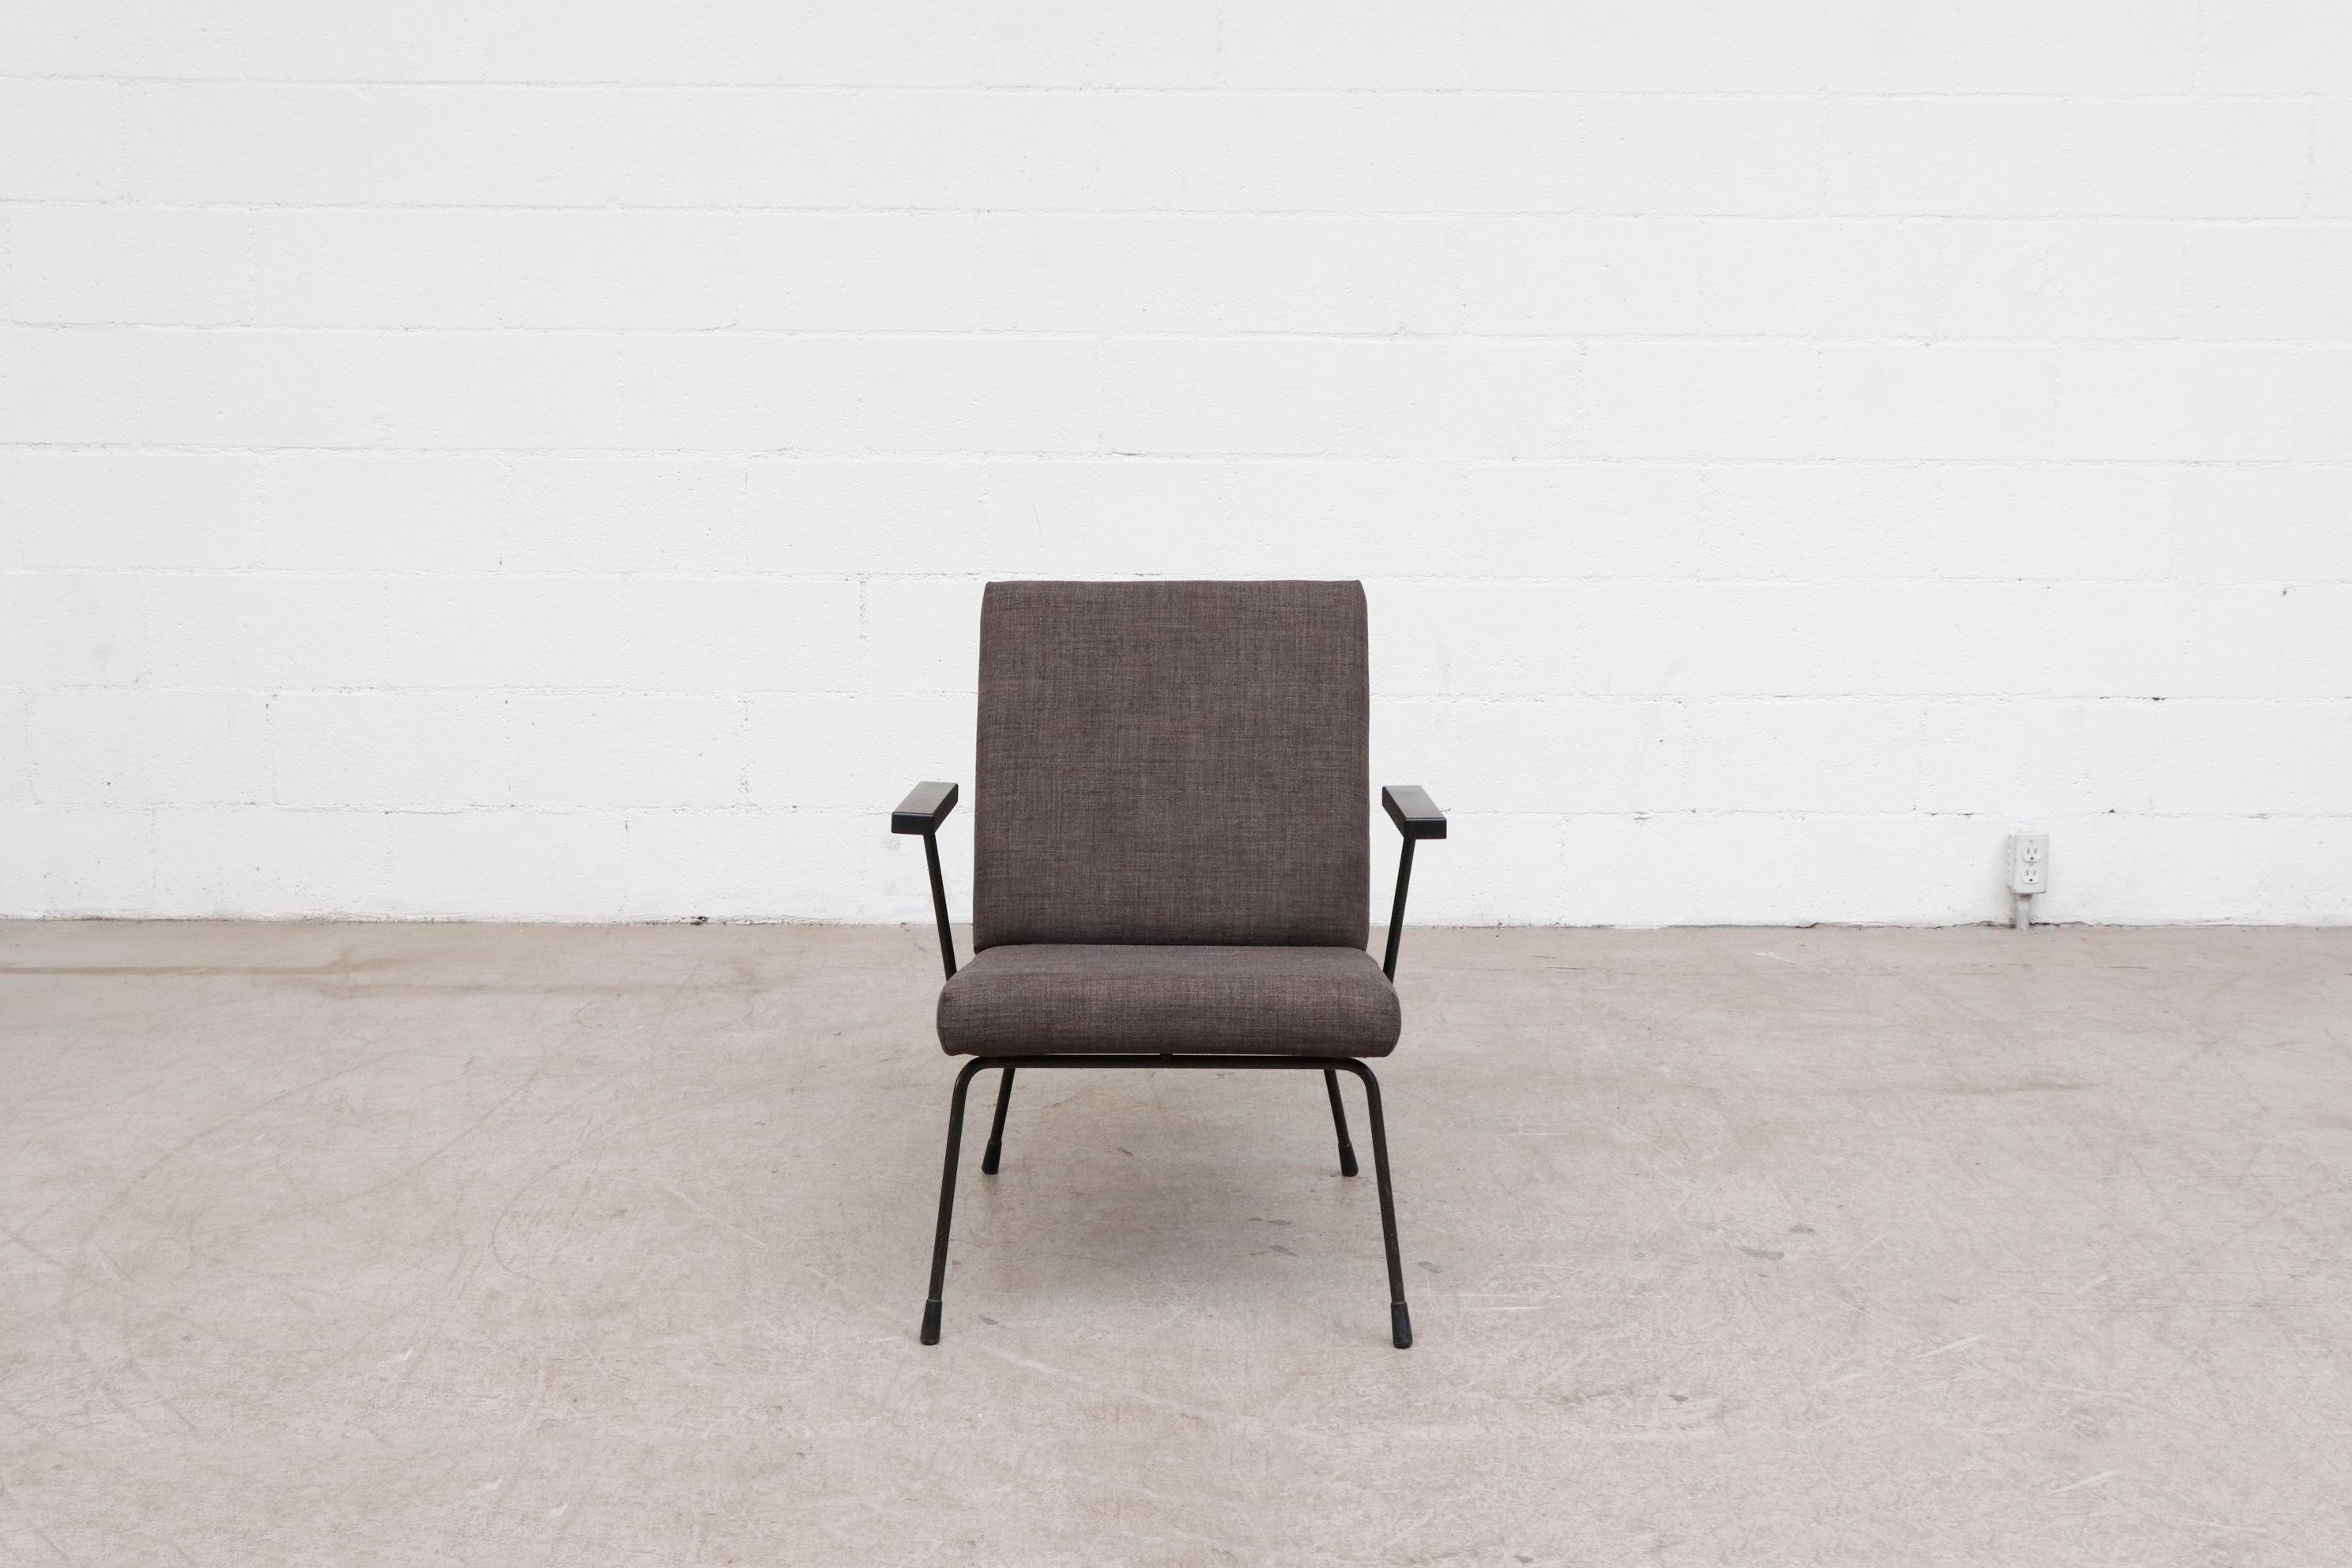 1950s Wim Rietveld lounge chair for Gispen with new charcoal grey upholstery and black enameled metal frame. In original condition with bakelite arms and some visible wear and scratching. Other Wim Rietveld lounge chairs (LU922421645382 and